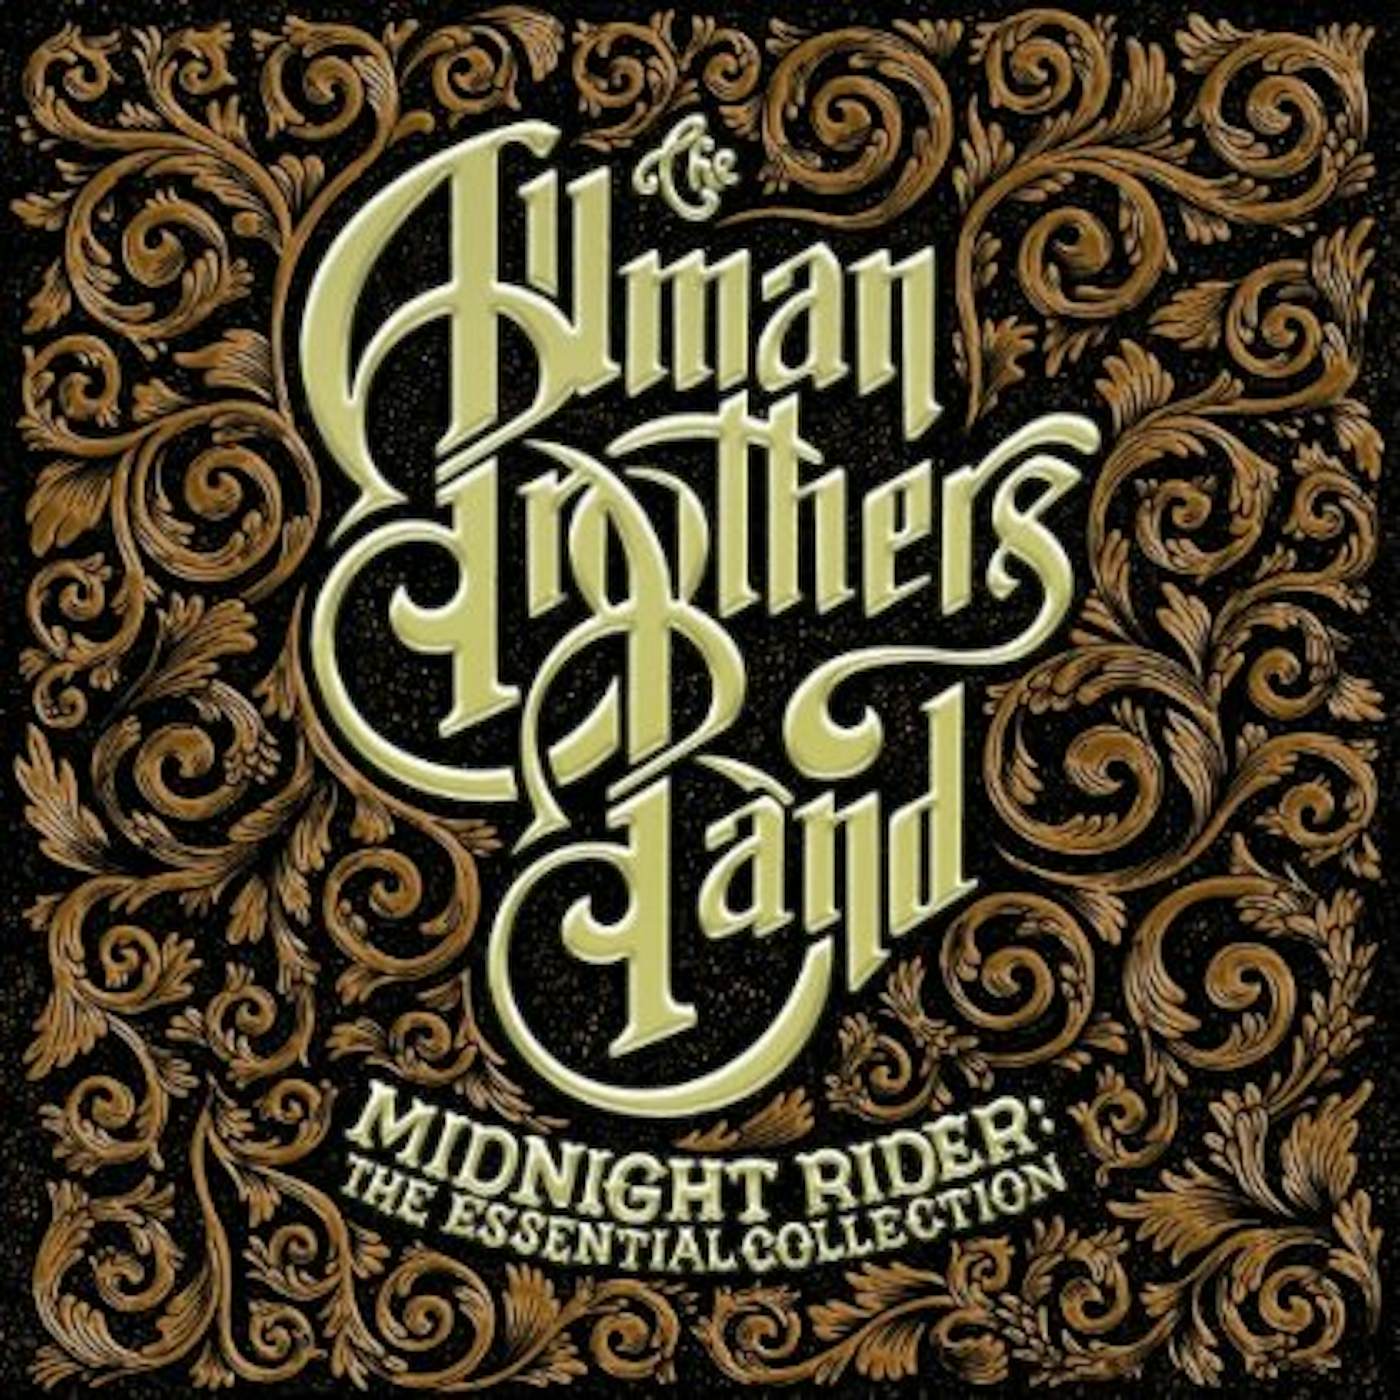 Allman Brothers Band MIDNIGHT RIDER: ESSENTIAL COLLECTION CD